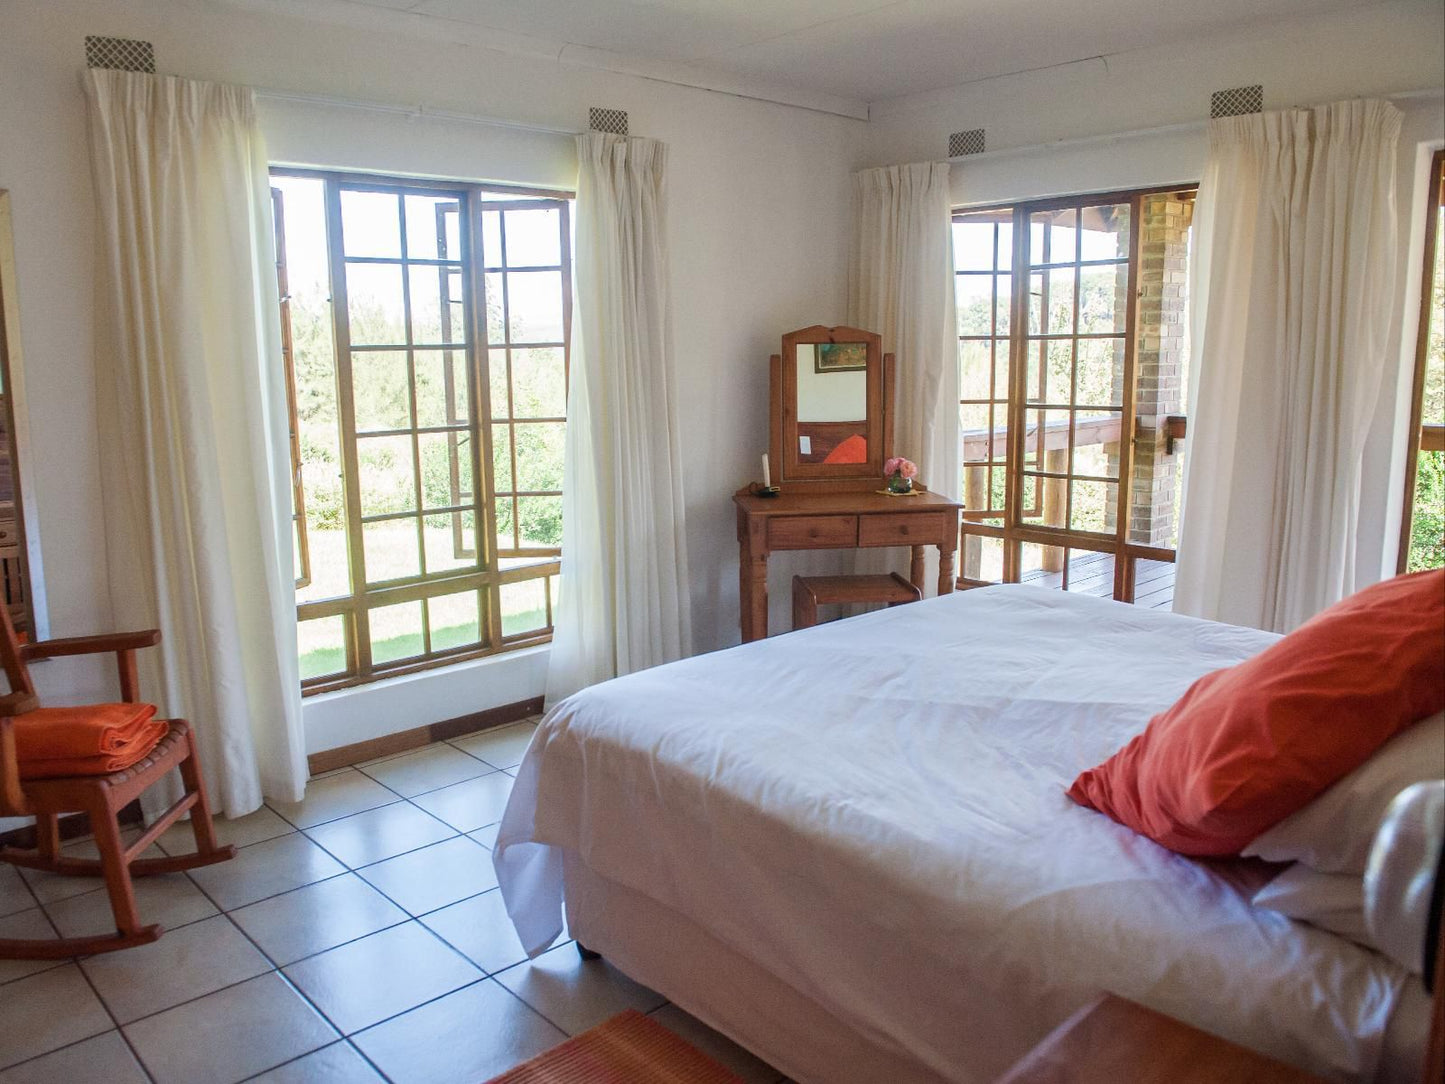 Cheerio Trout Fishing And Holiday Resort Haenertsburg Limpopo Province South Africa Bedroom